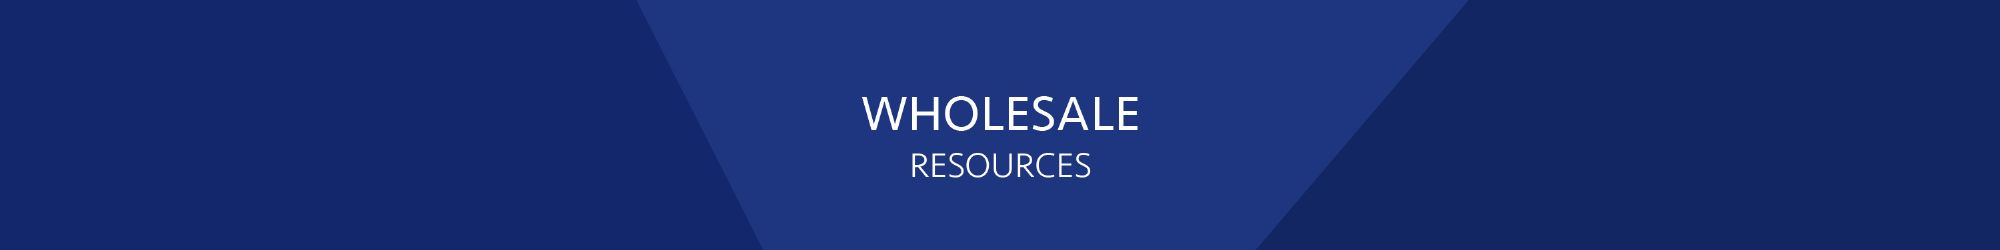 About Wholesale